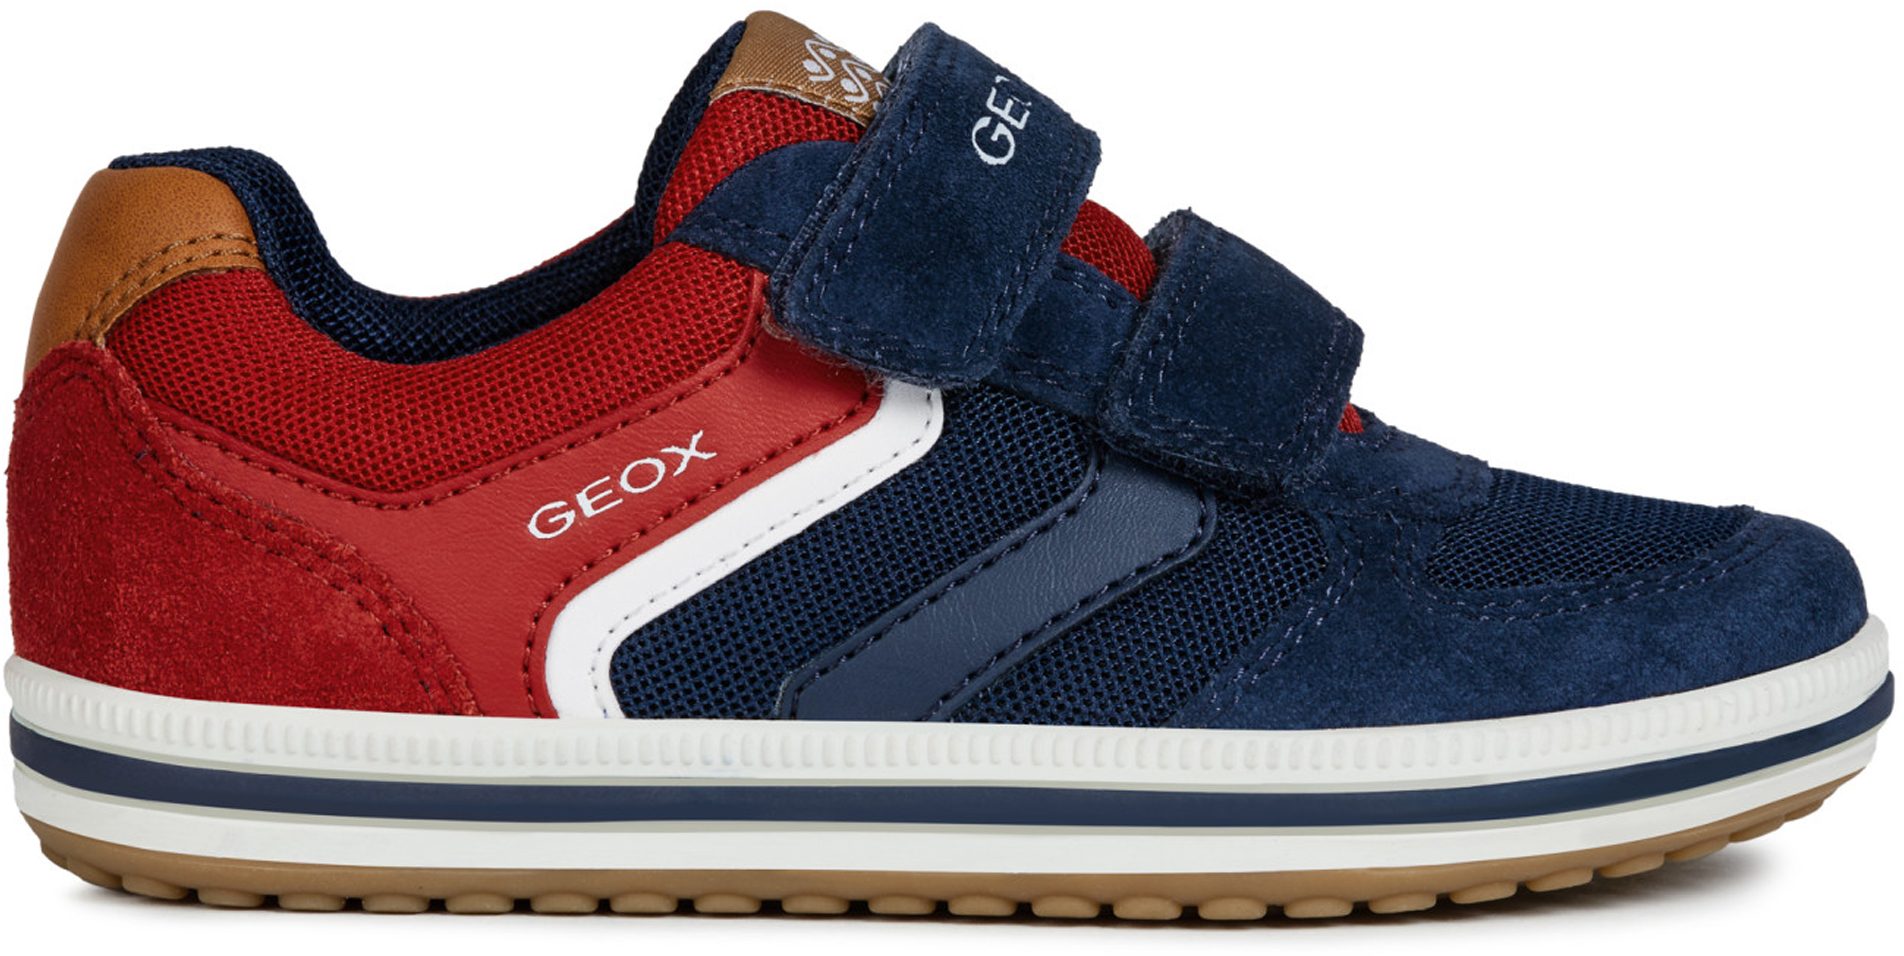 Geox JR Red / Navy J92A4A 01422 C7217 - Boys Shoes - Humphries Shoes